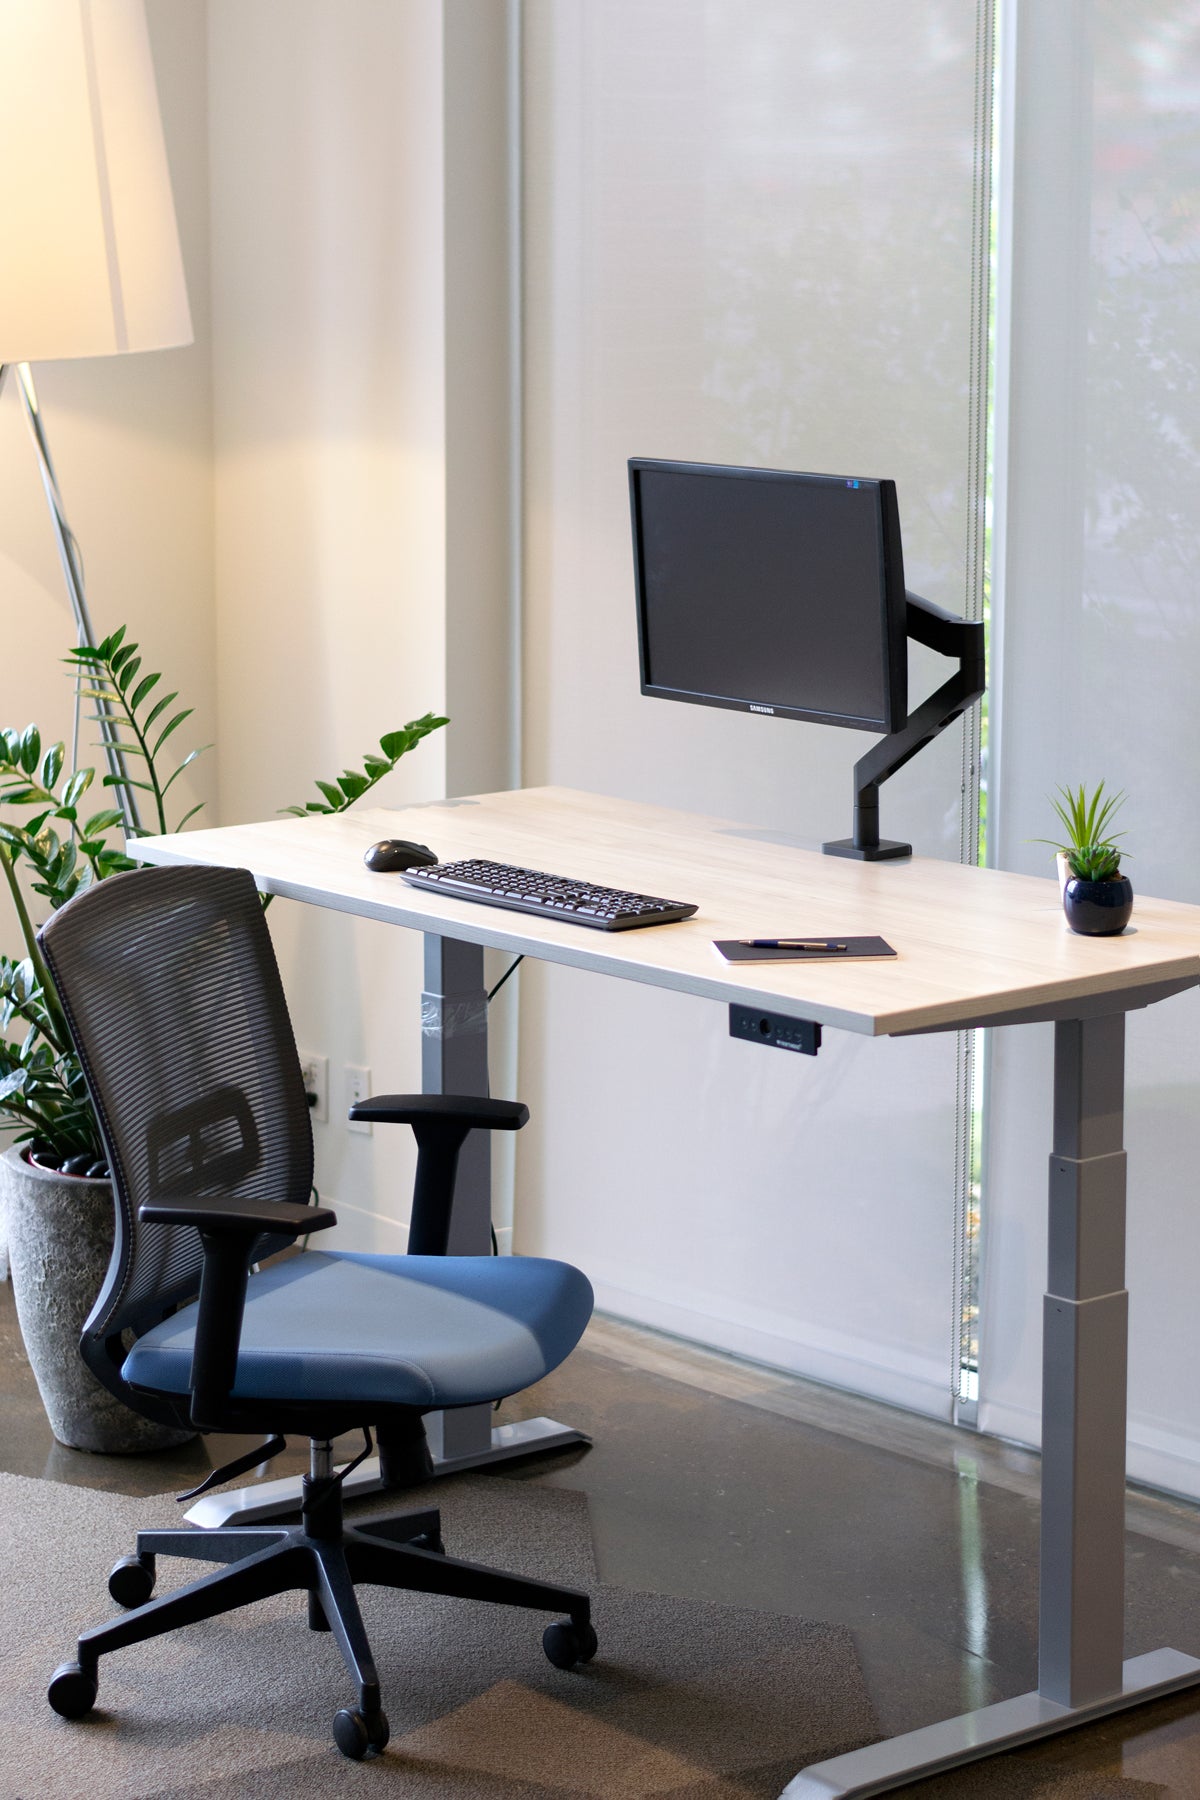 Height adjustable desk at standing height with Winter Wood laminate top and silver legs. Grey and blue office chair in front. 